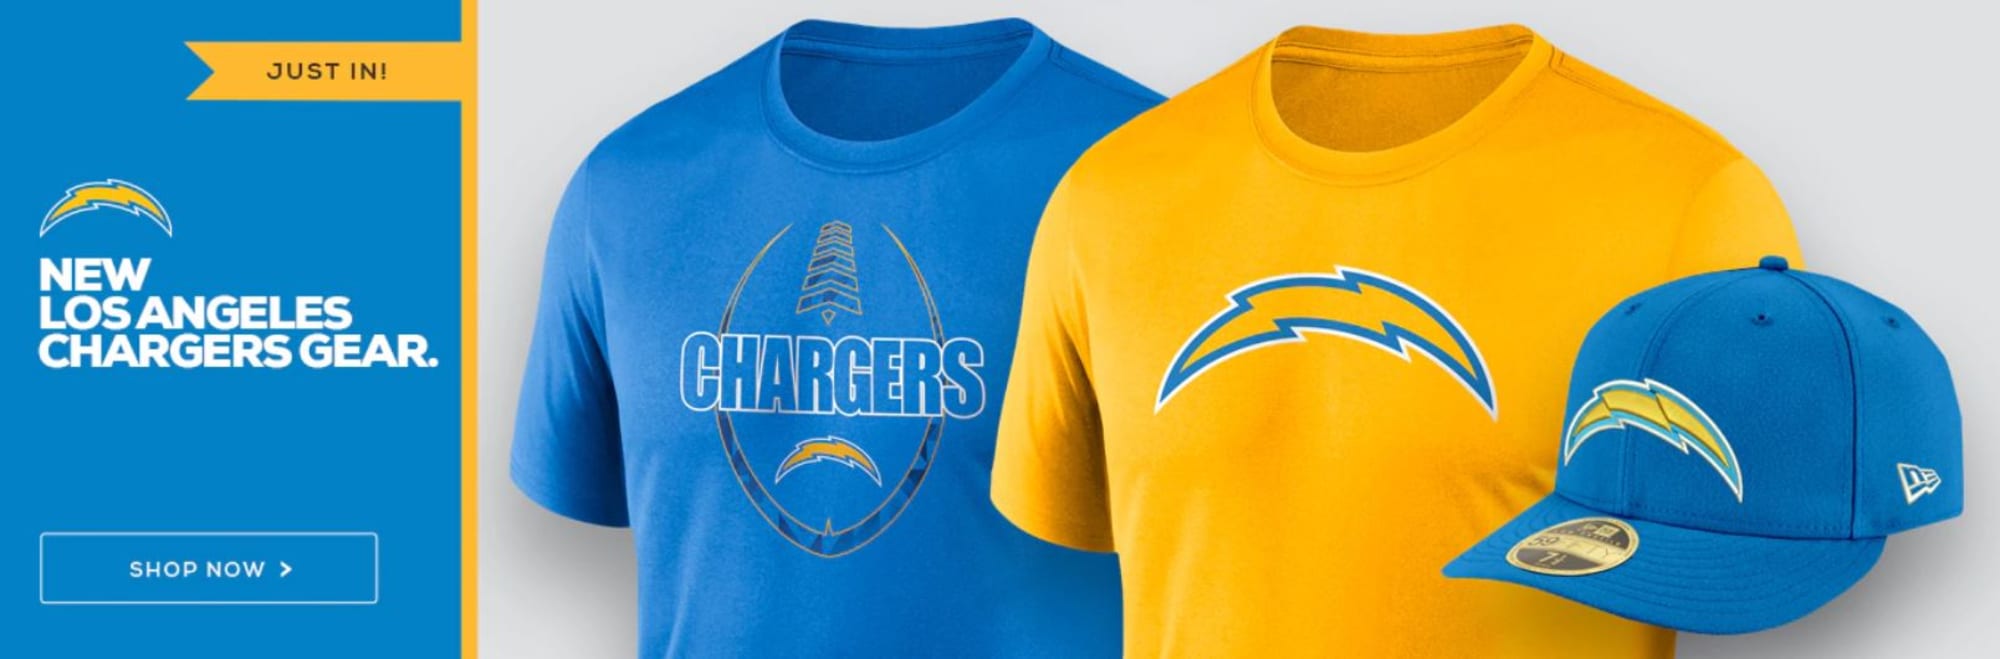 Los Angeles Chargers logo gear 